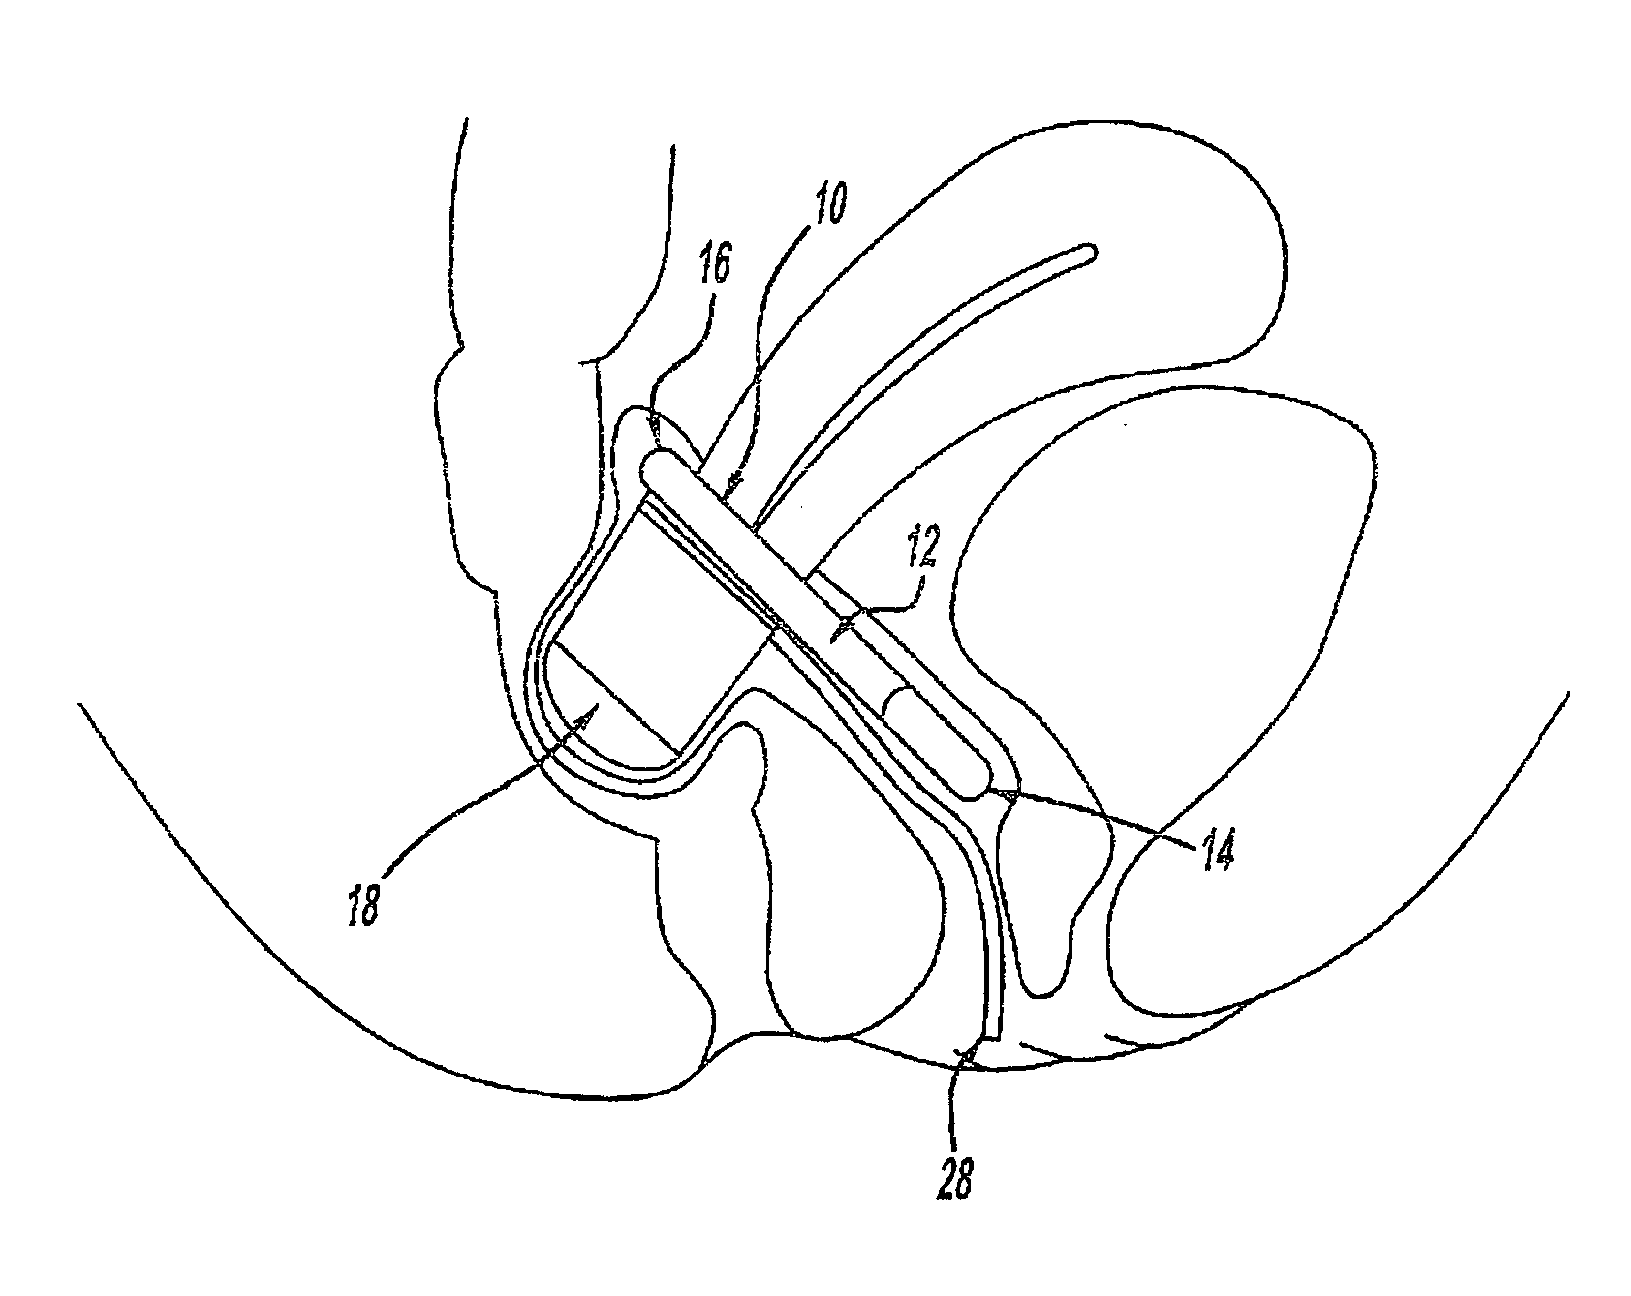 Intra-vaginal device for fecal incontinence